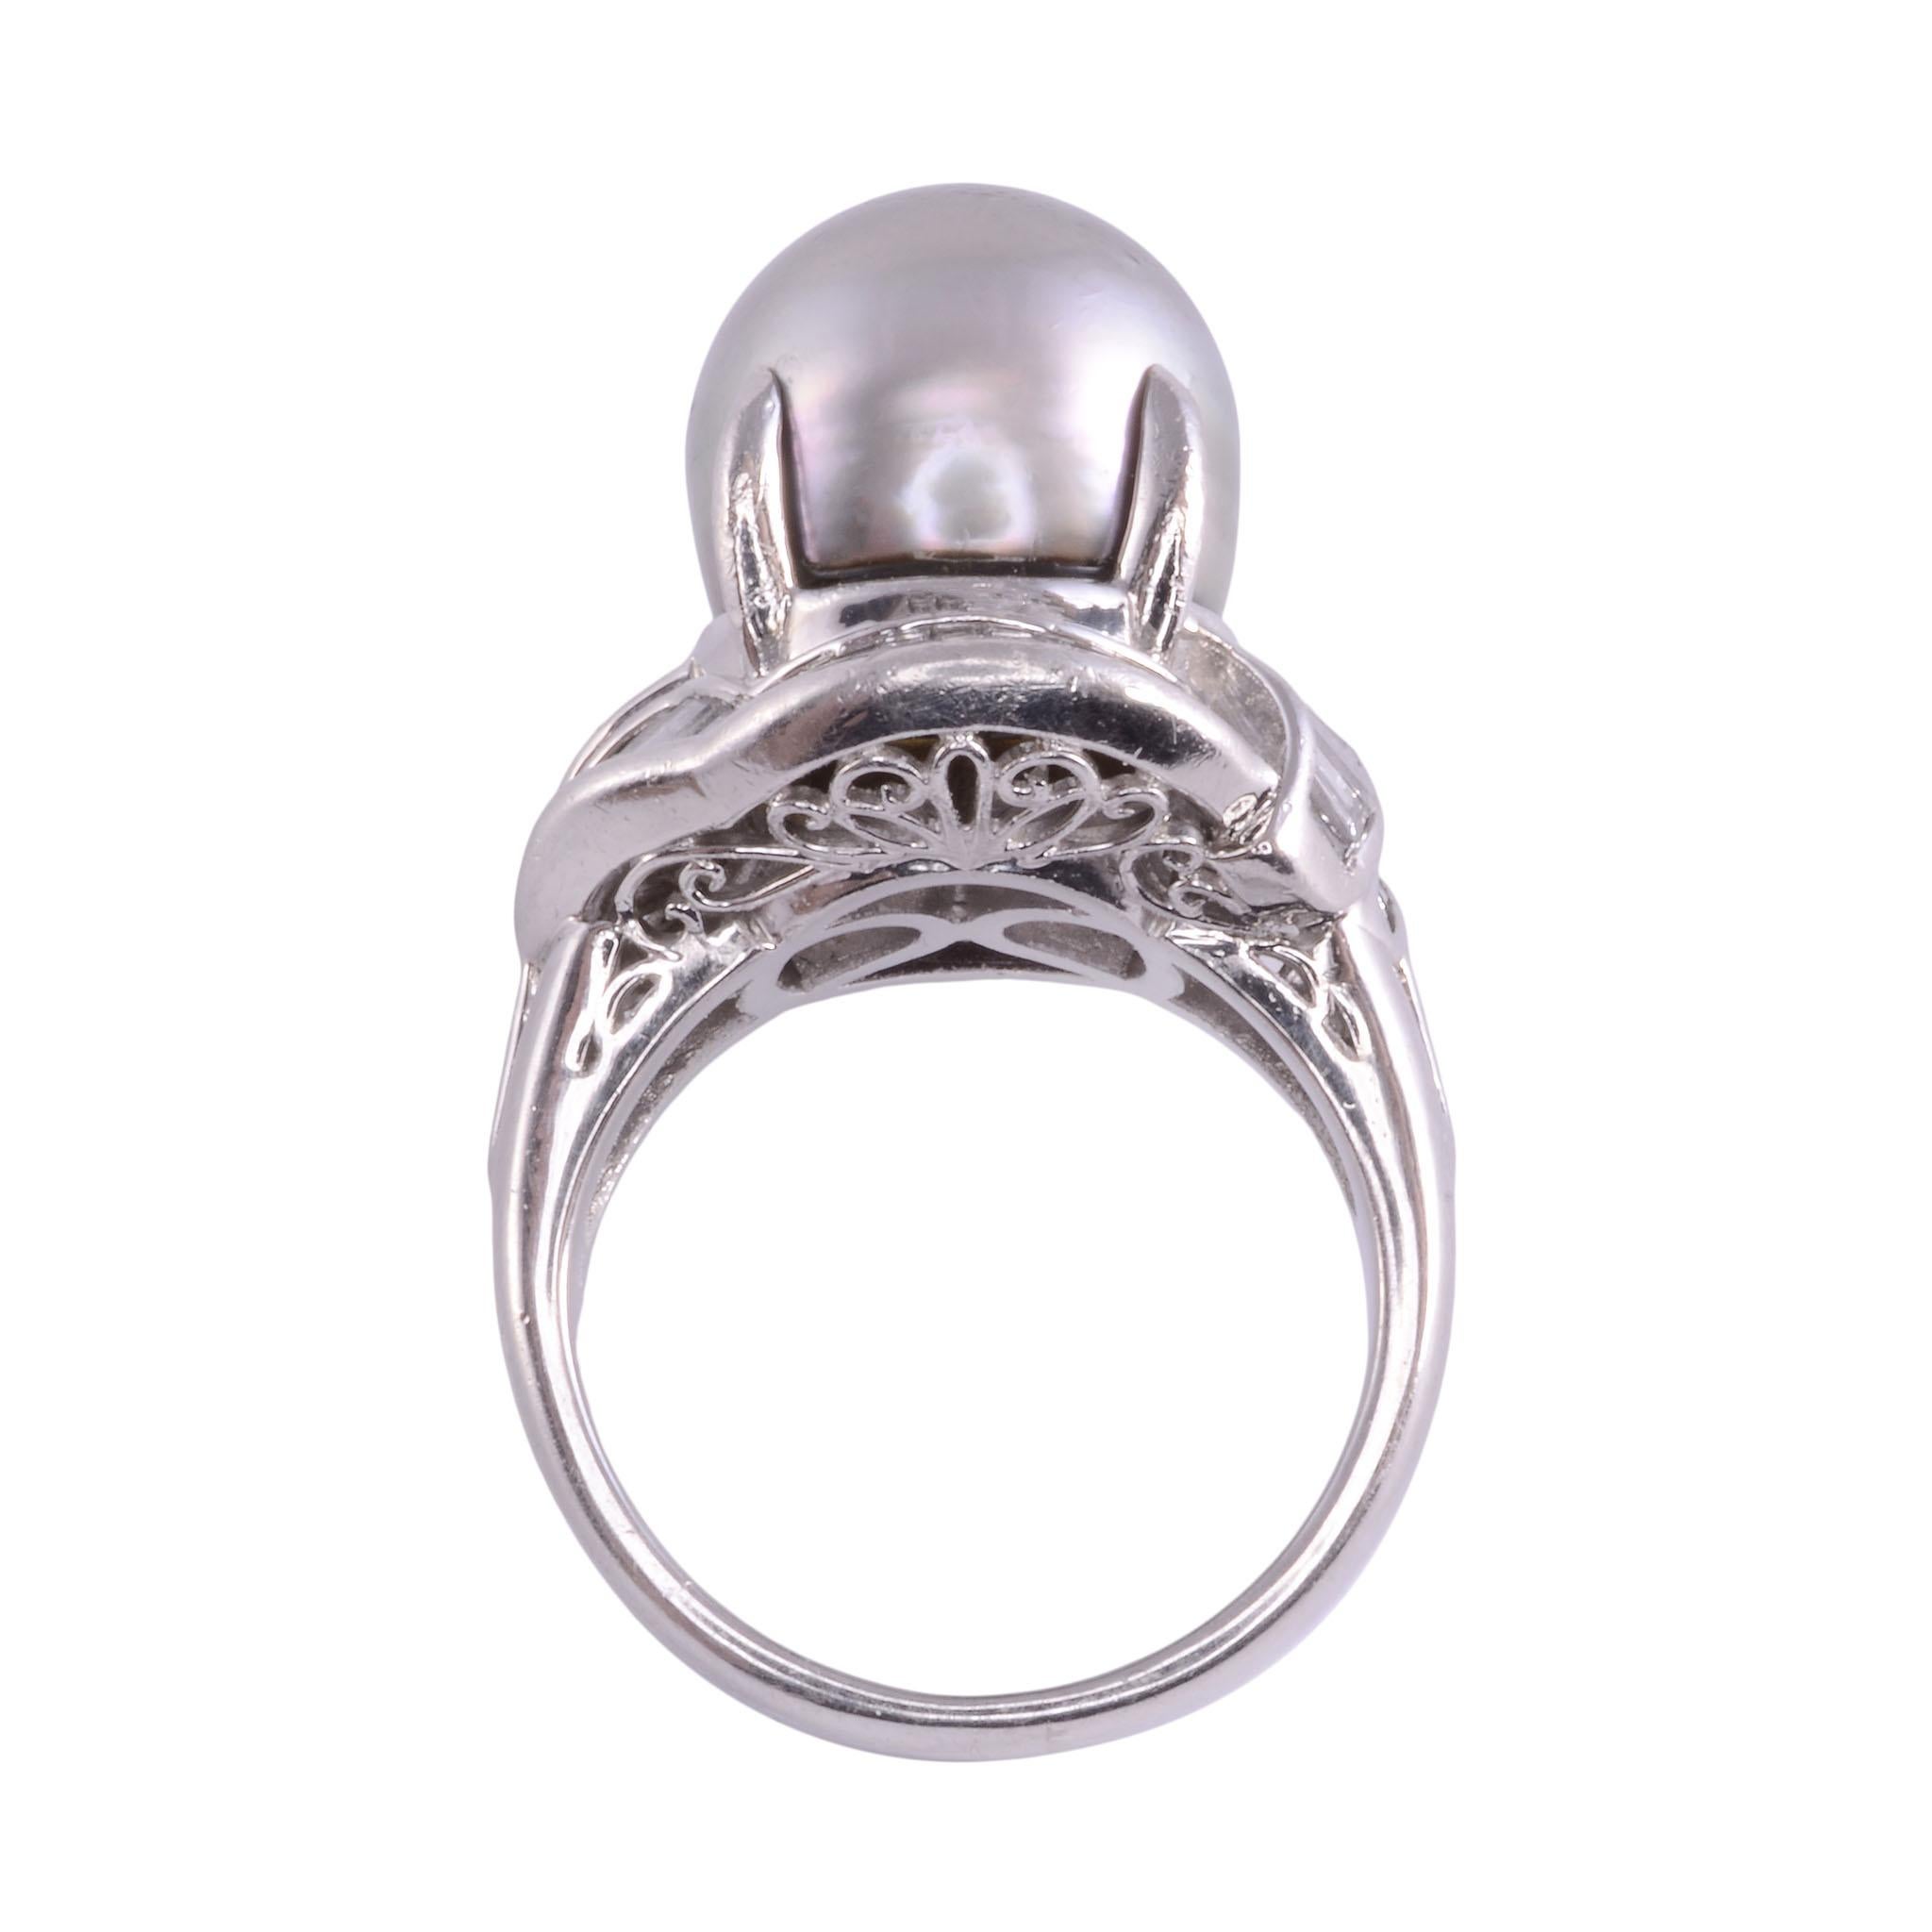 South Seas Pearl Platinum Ring In Good Condition For Sale In Solvang, CA